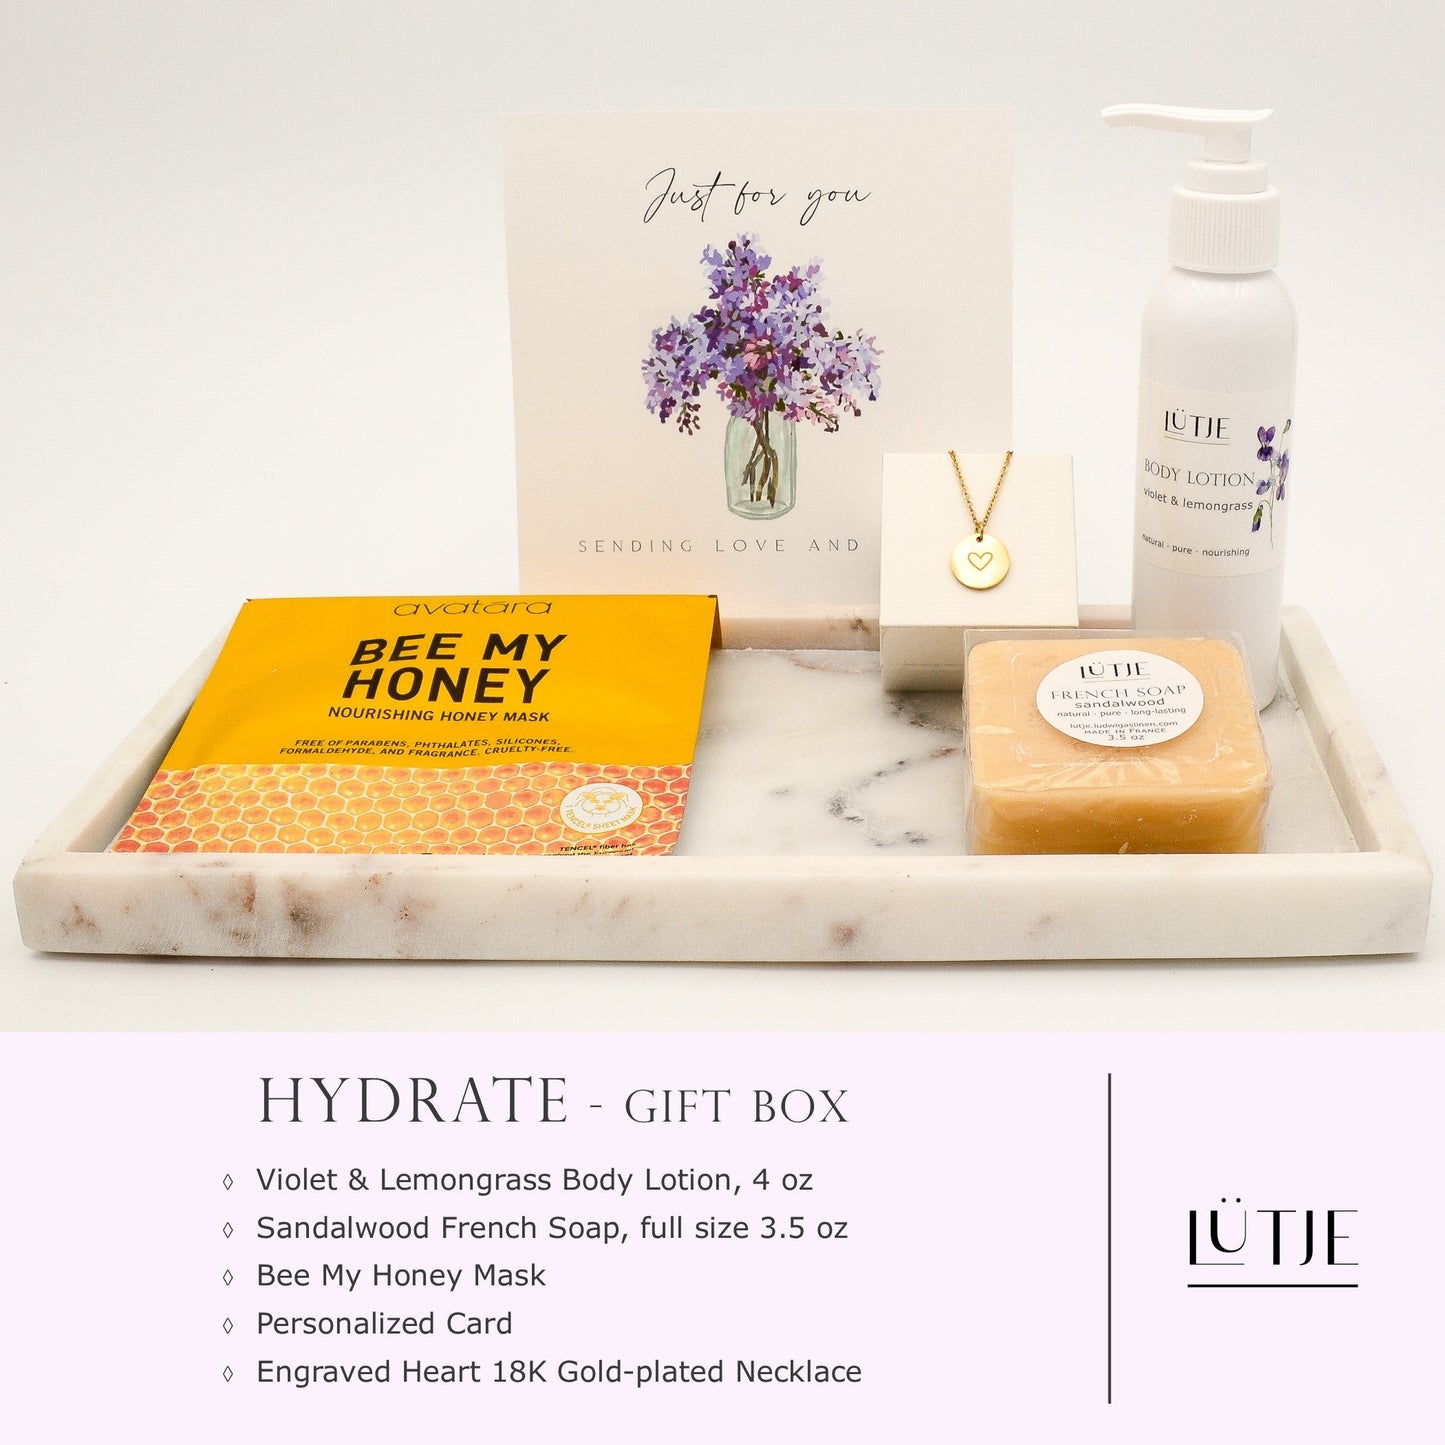 Hydrate Gift Box for women, daughter, mom, BFF, wife, sister or grandma, includes Violet & Lemongrass body lotion, French soap, hydrating face mask, and optional 18K gold-plated necklace with engraved heart.